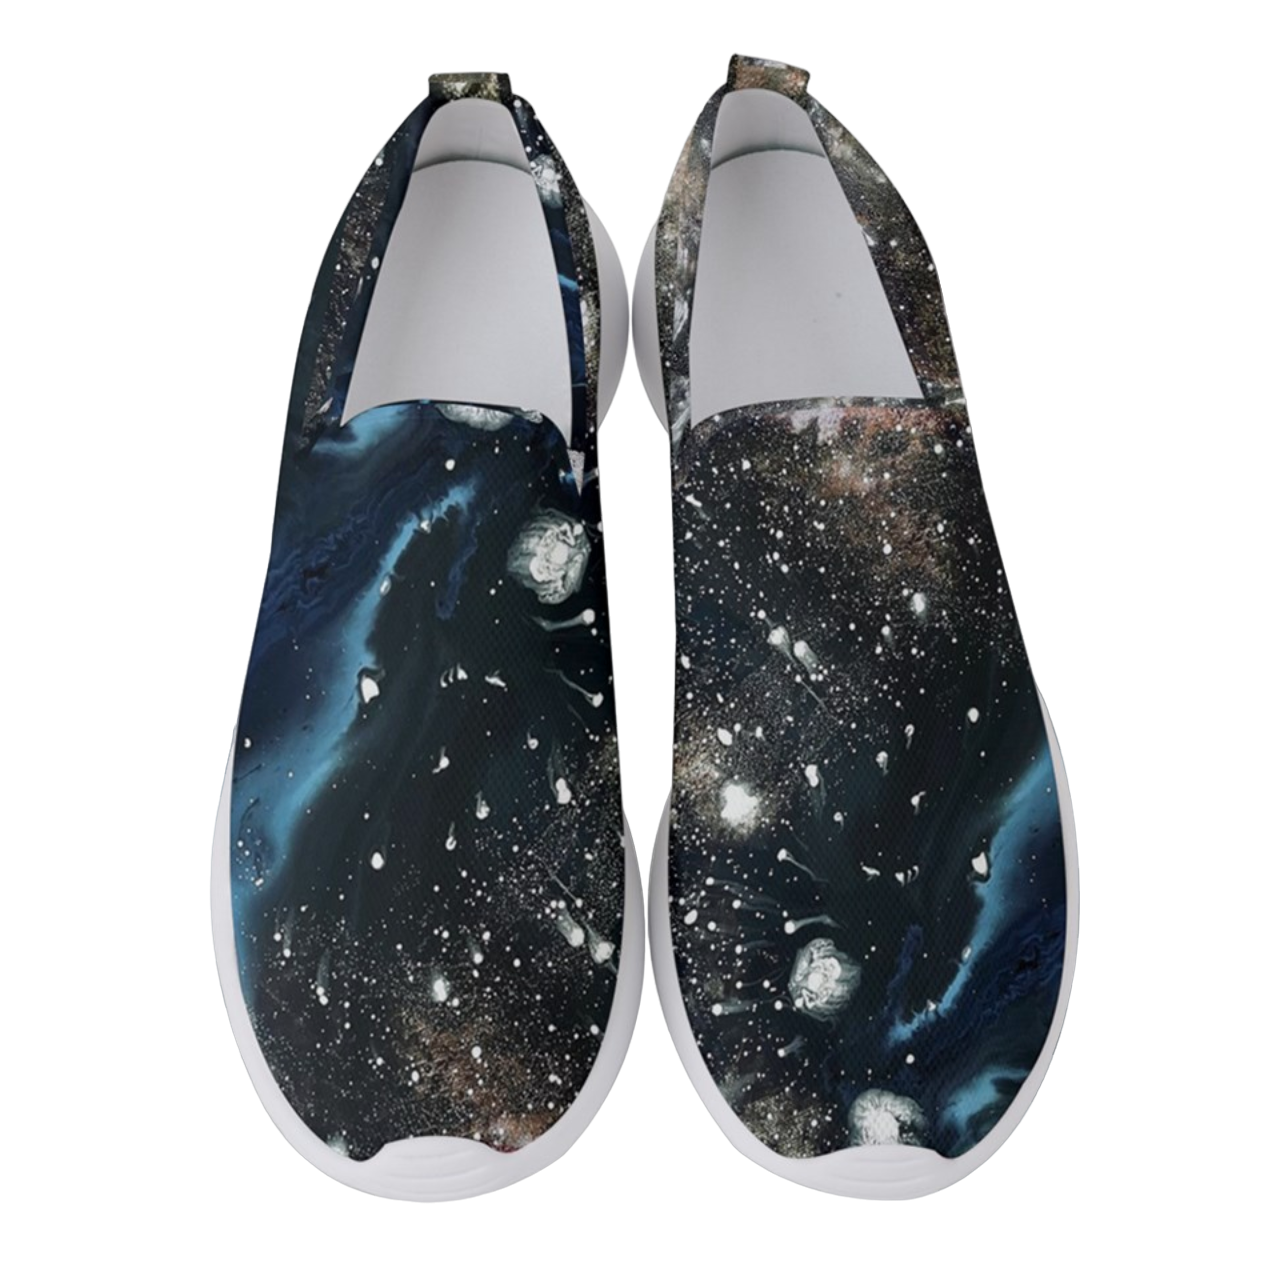 Starry Galaxy Sneakers